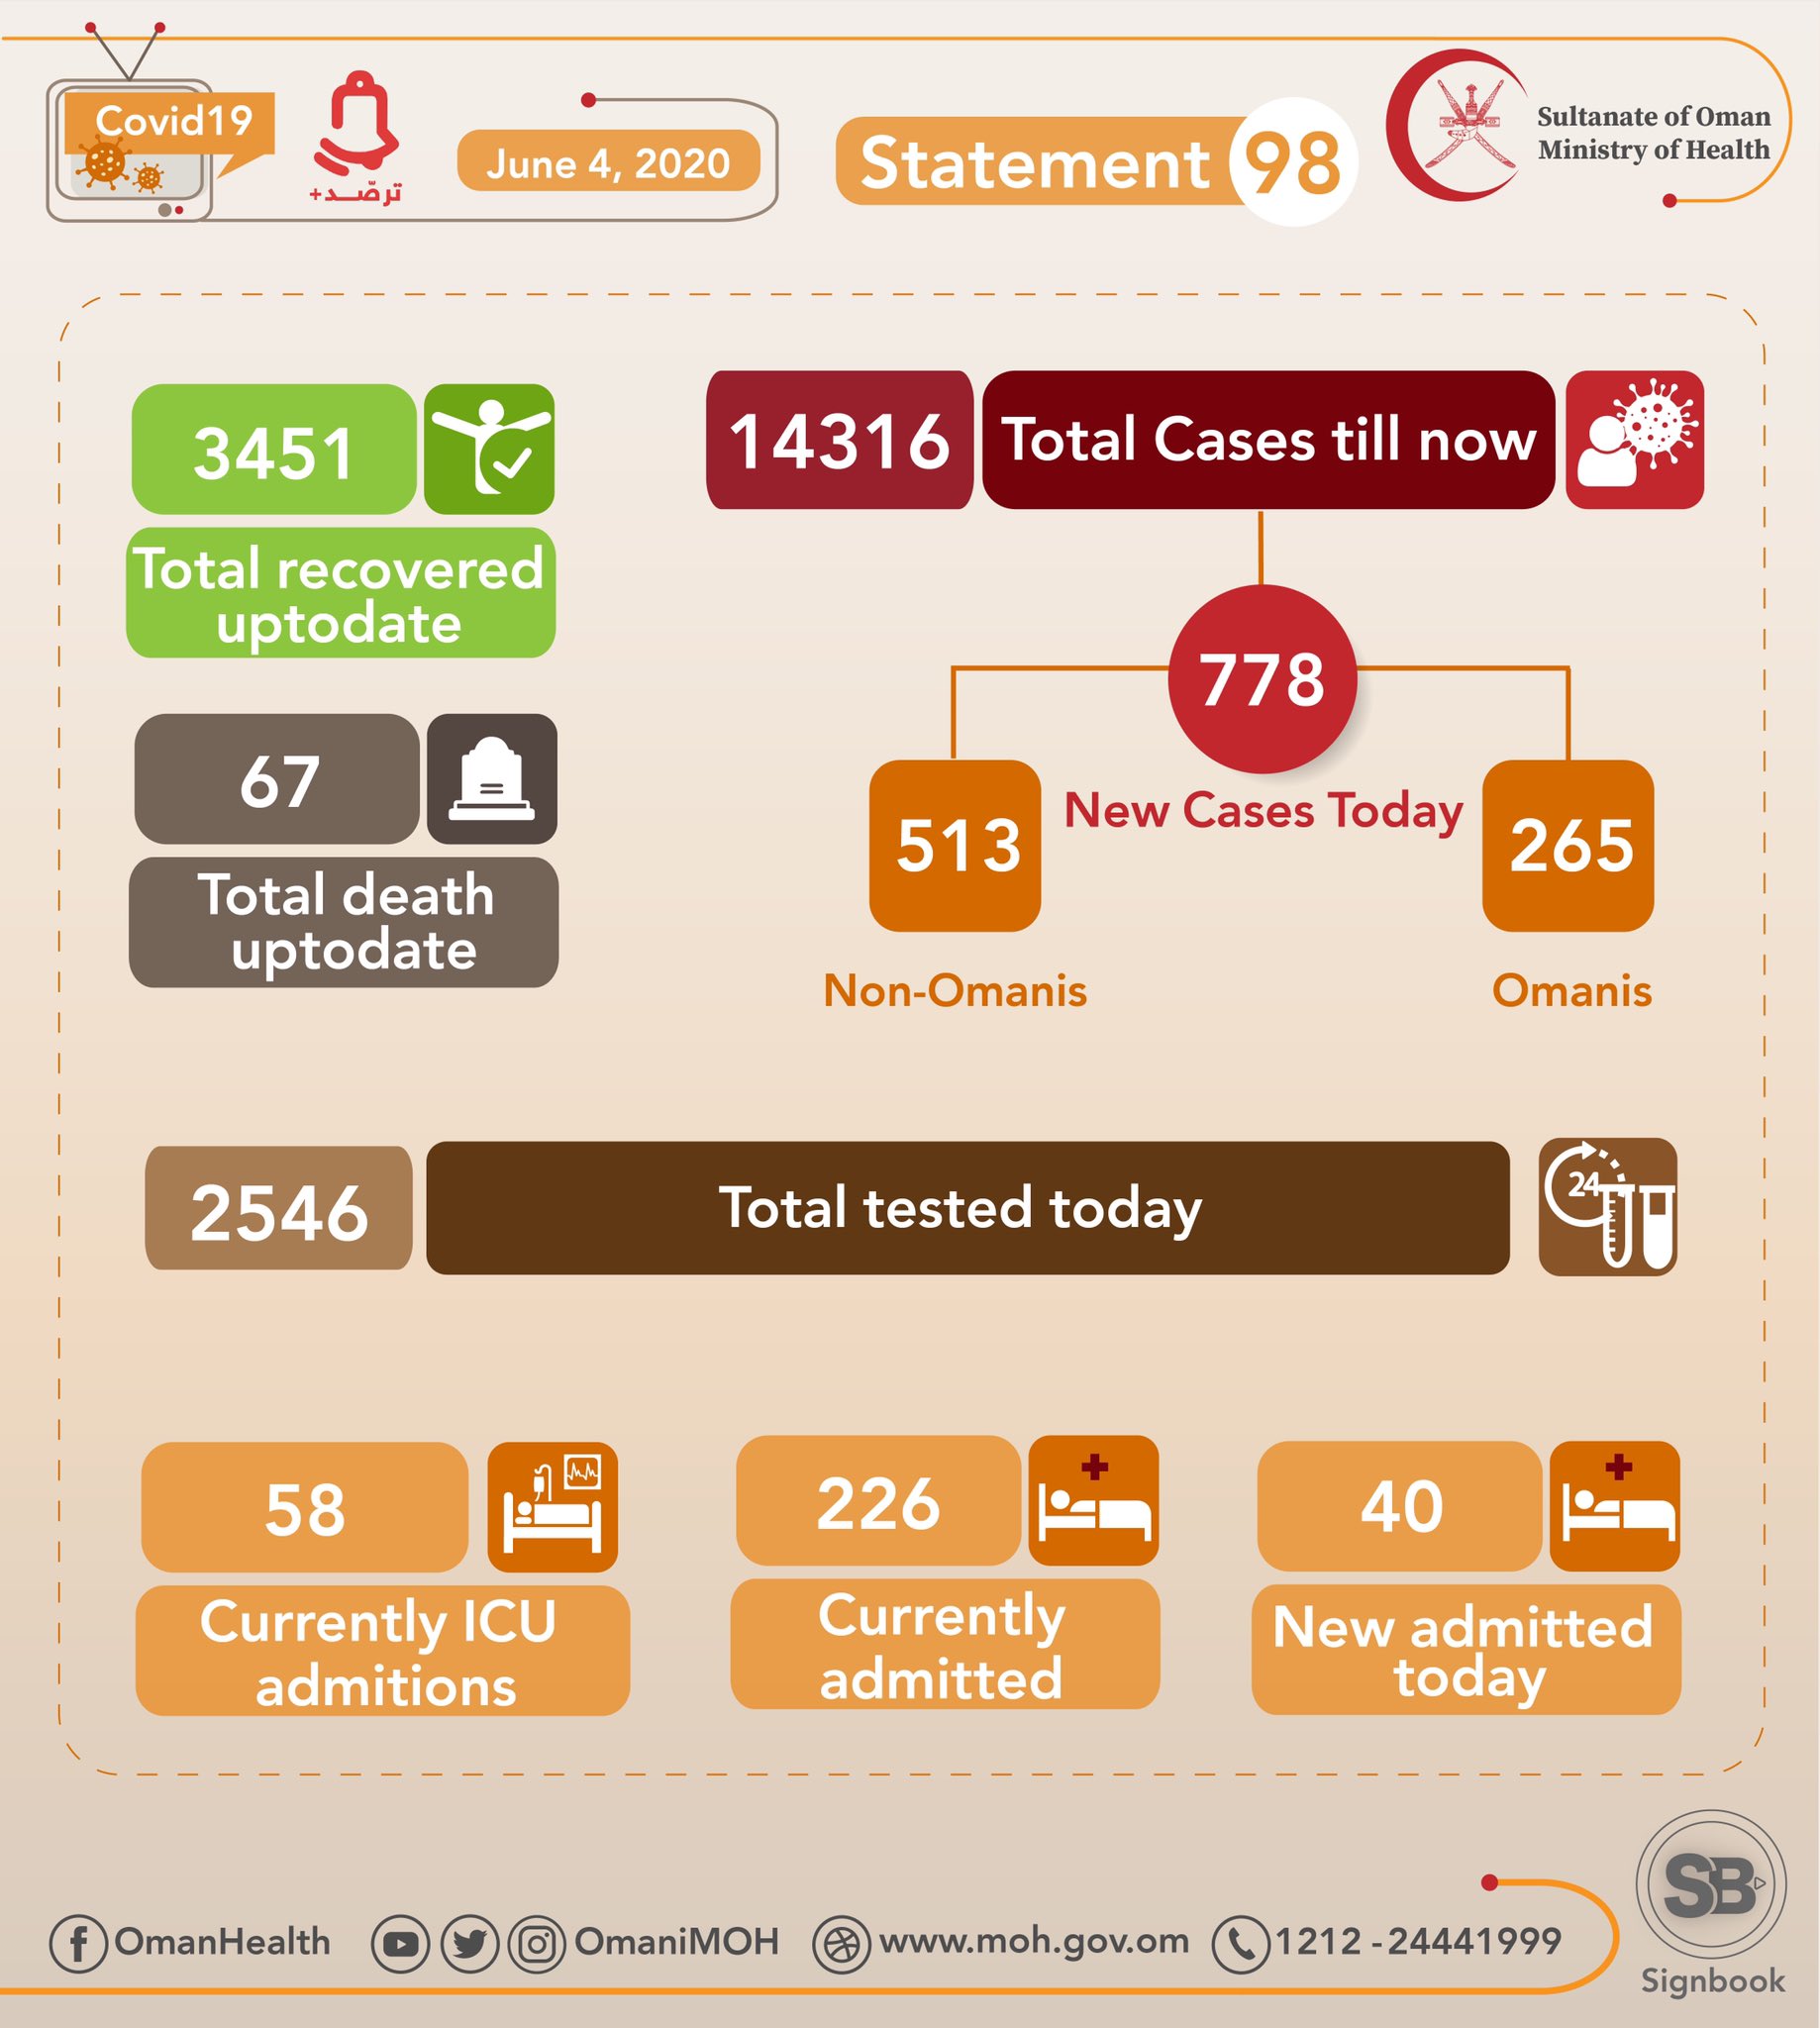 778 New Cases Registered In Oman, Total Cases 14, 316